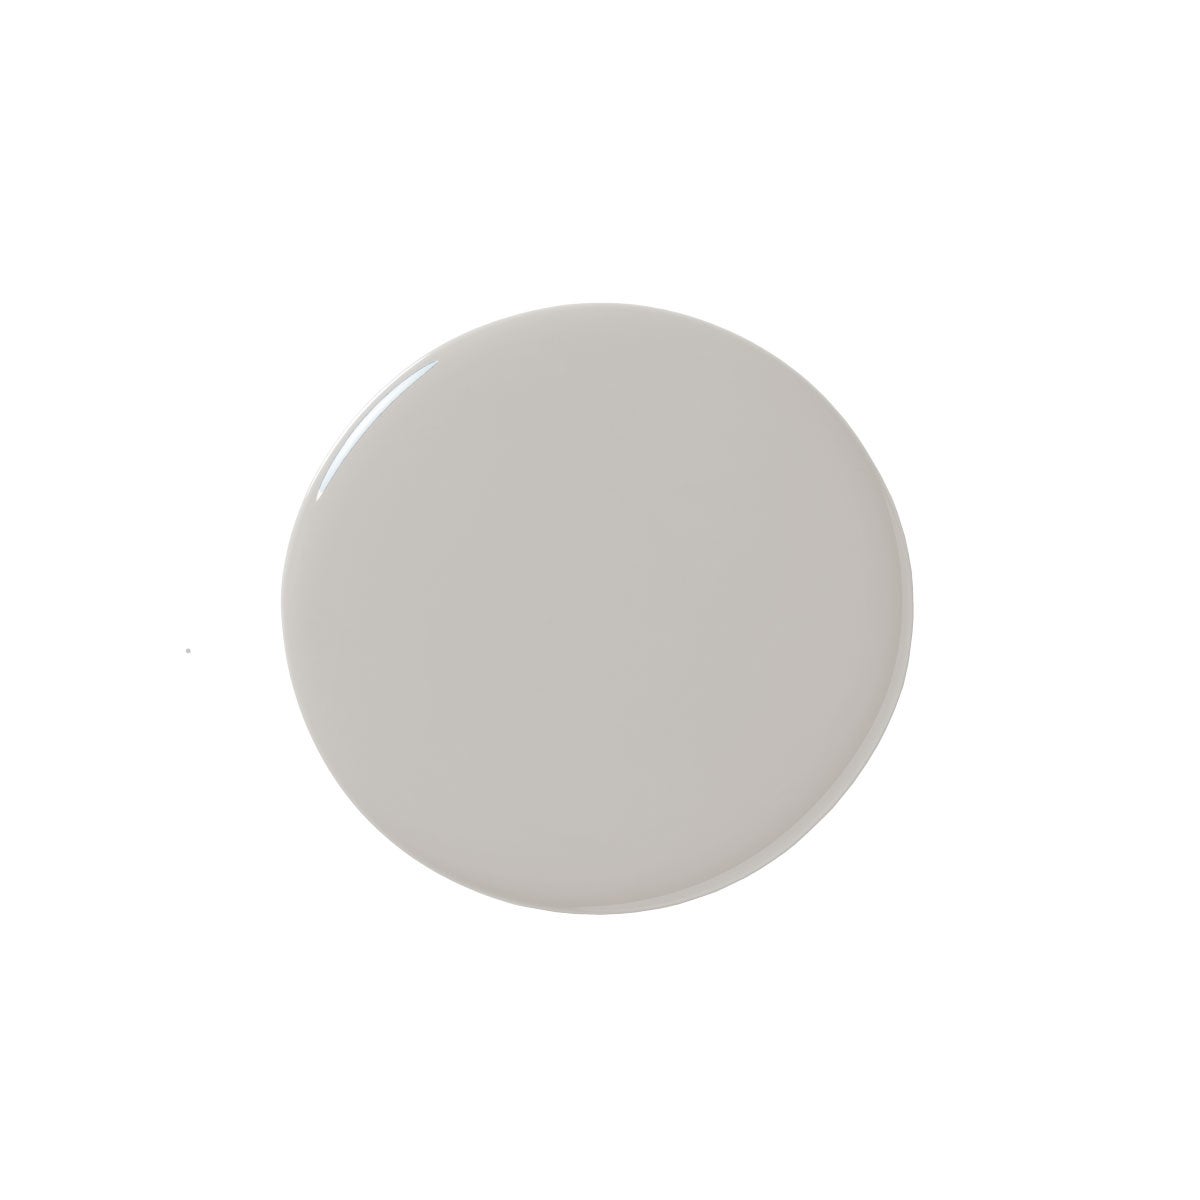 Light Neutral Gray Paint Blob by Clare